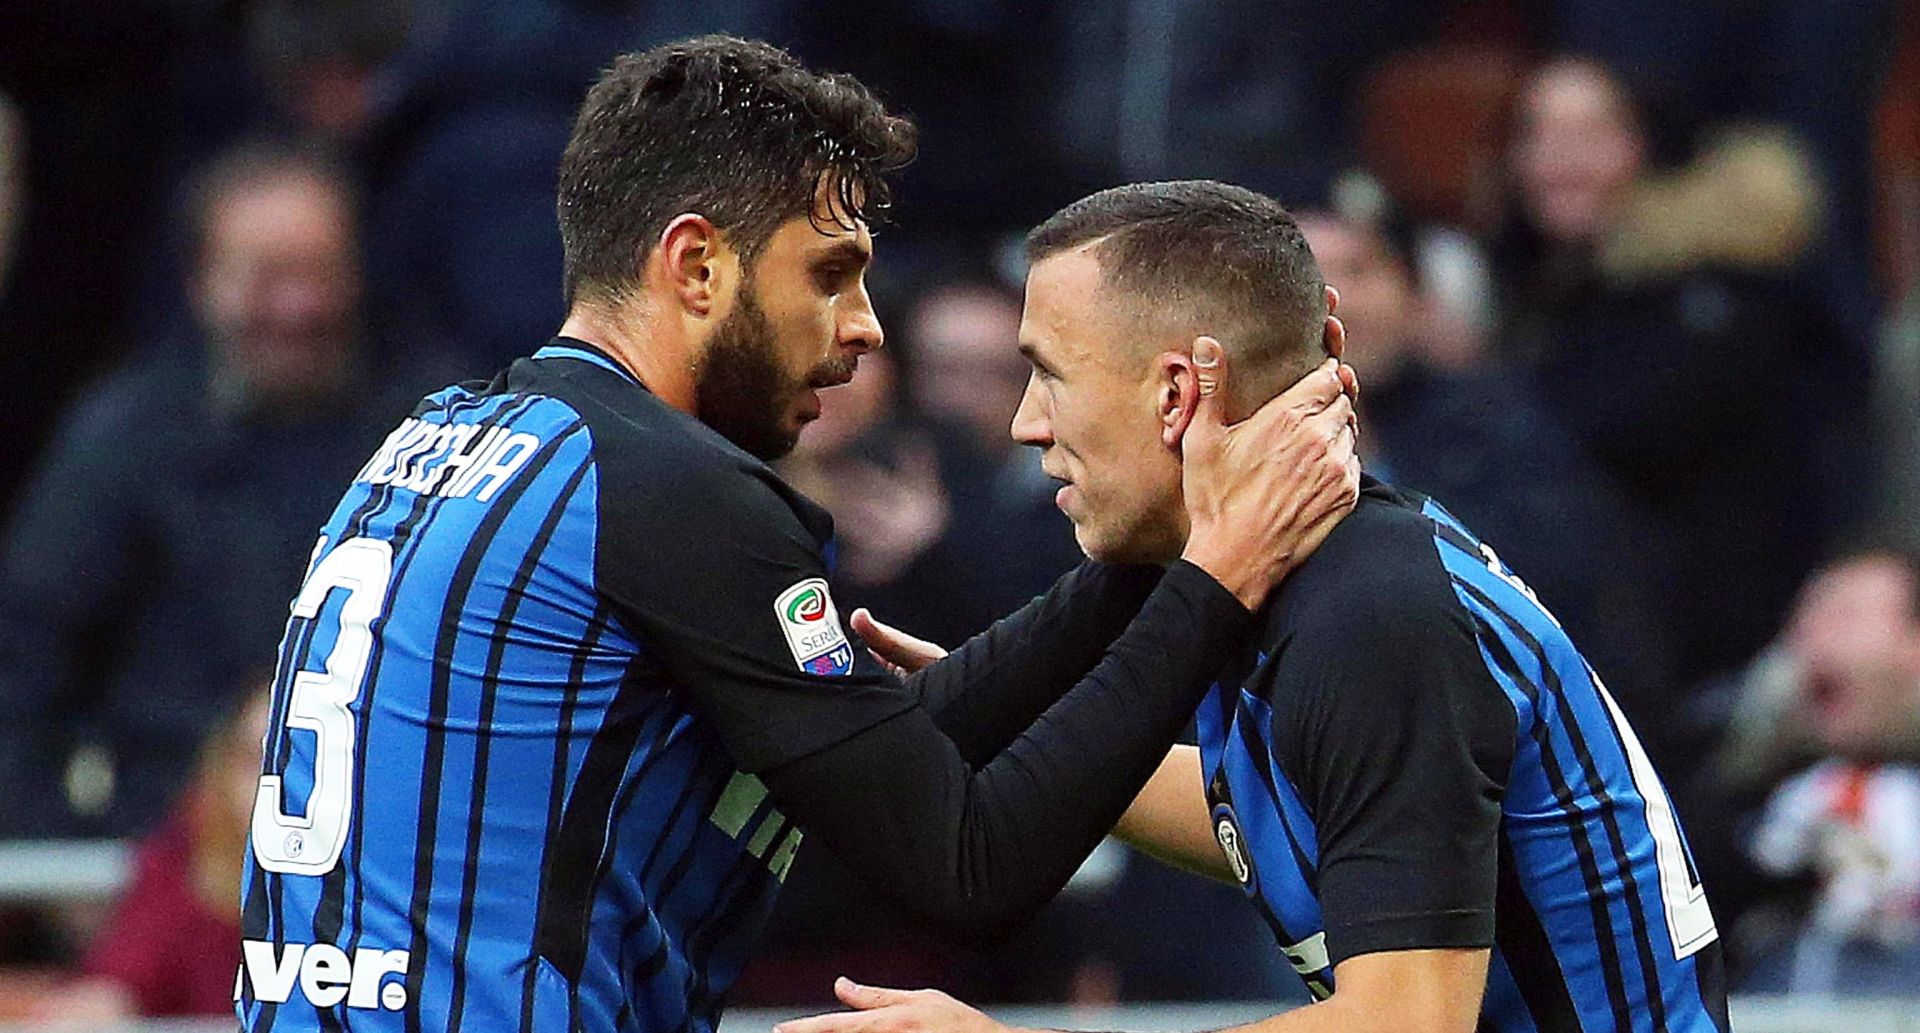 epa06365281 Inter's midfielder Ivan Perisic (R) celebrates with his teammate Andrea Ranocchia (L) after scoring the 1-0 lead during the Italian Serie A soccer match between Inter Milan and AC Chievo Verona at Giuseppe Meazza stadium in Milan, Italy, 03 December 2017.  EPA/MATTEO BAZZI